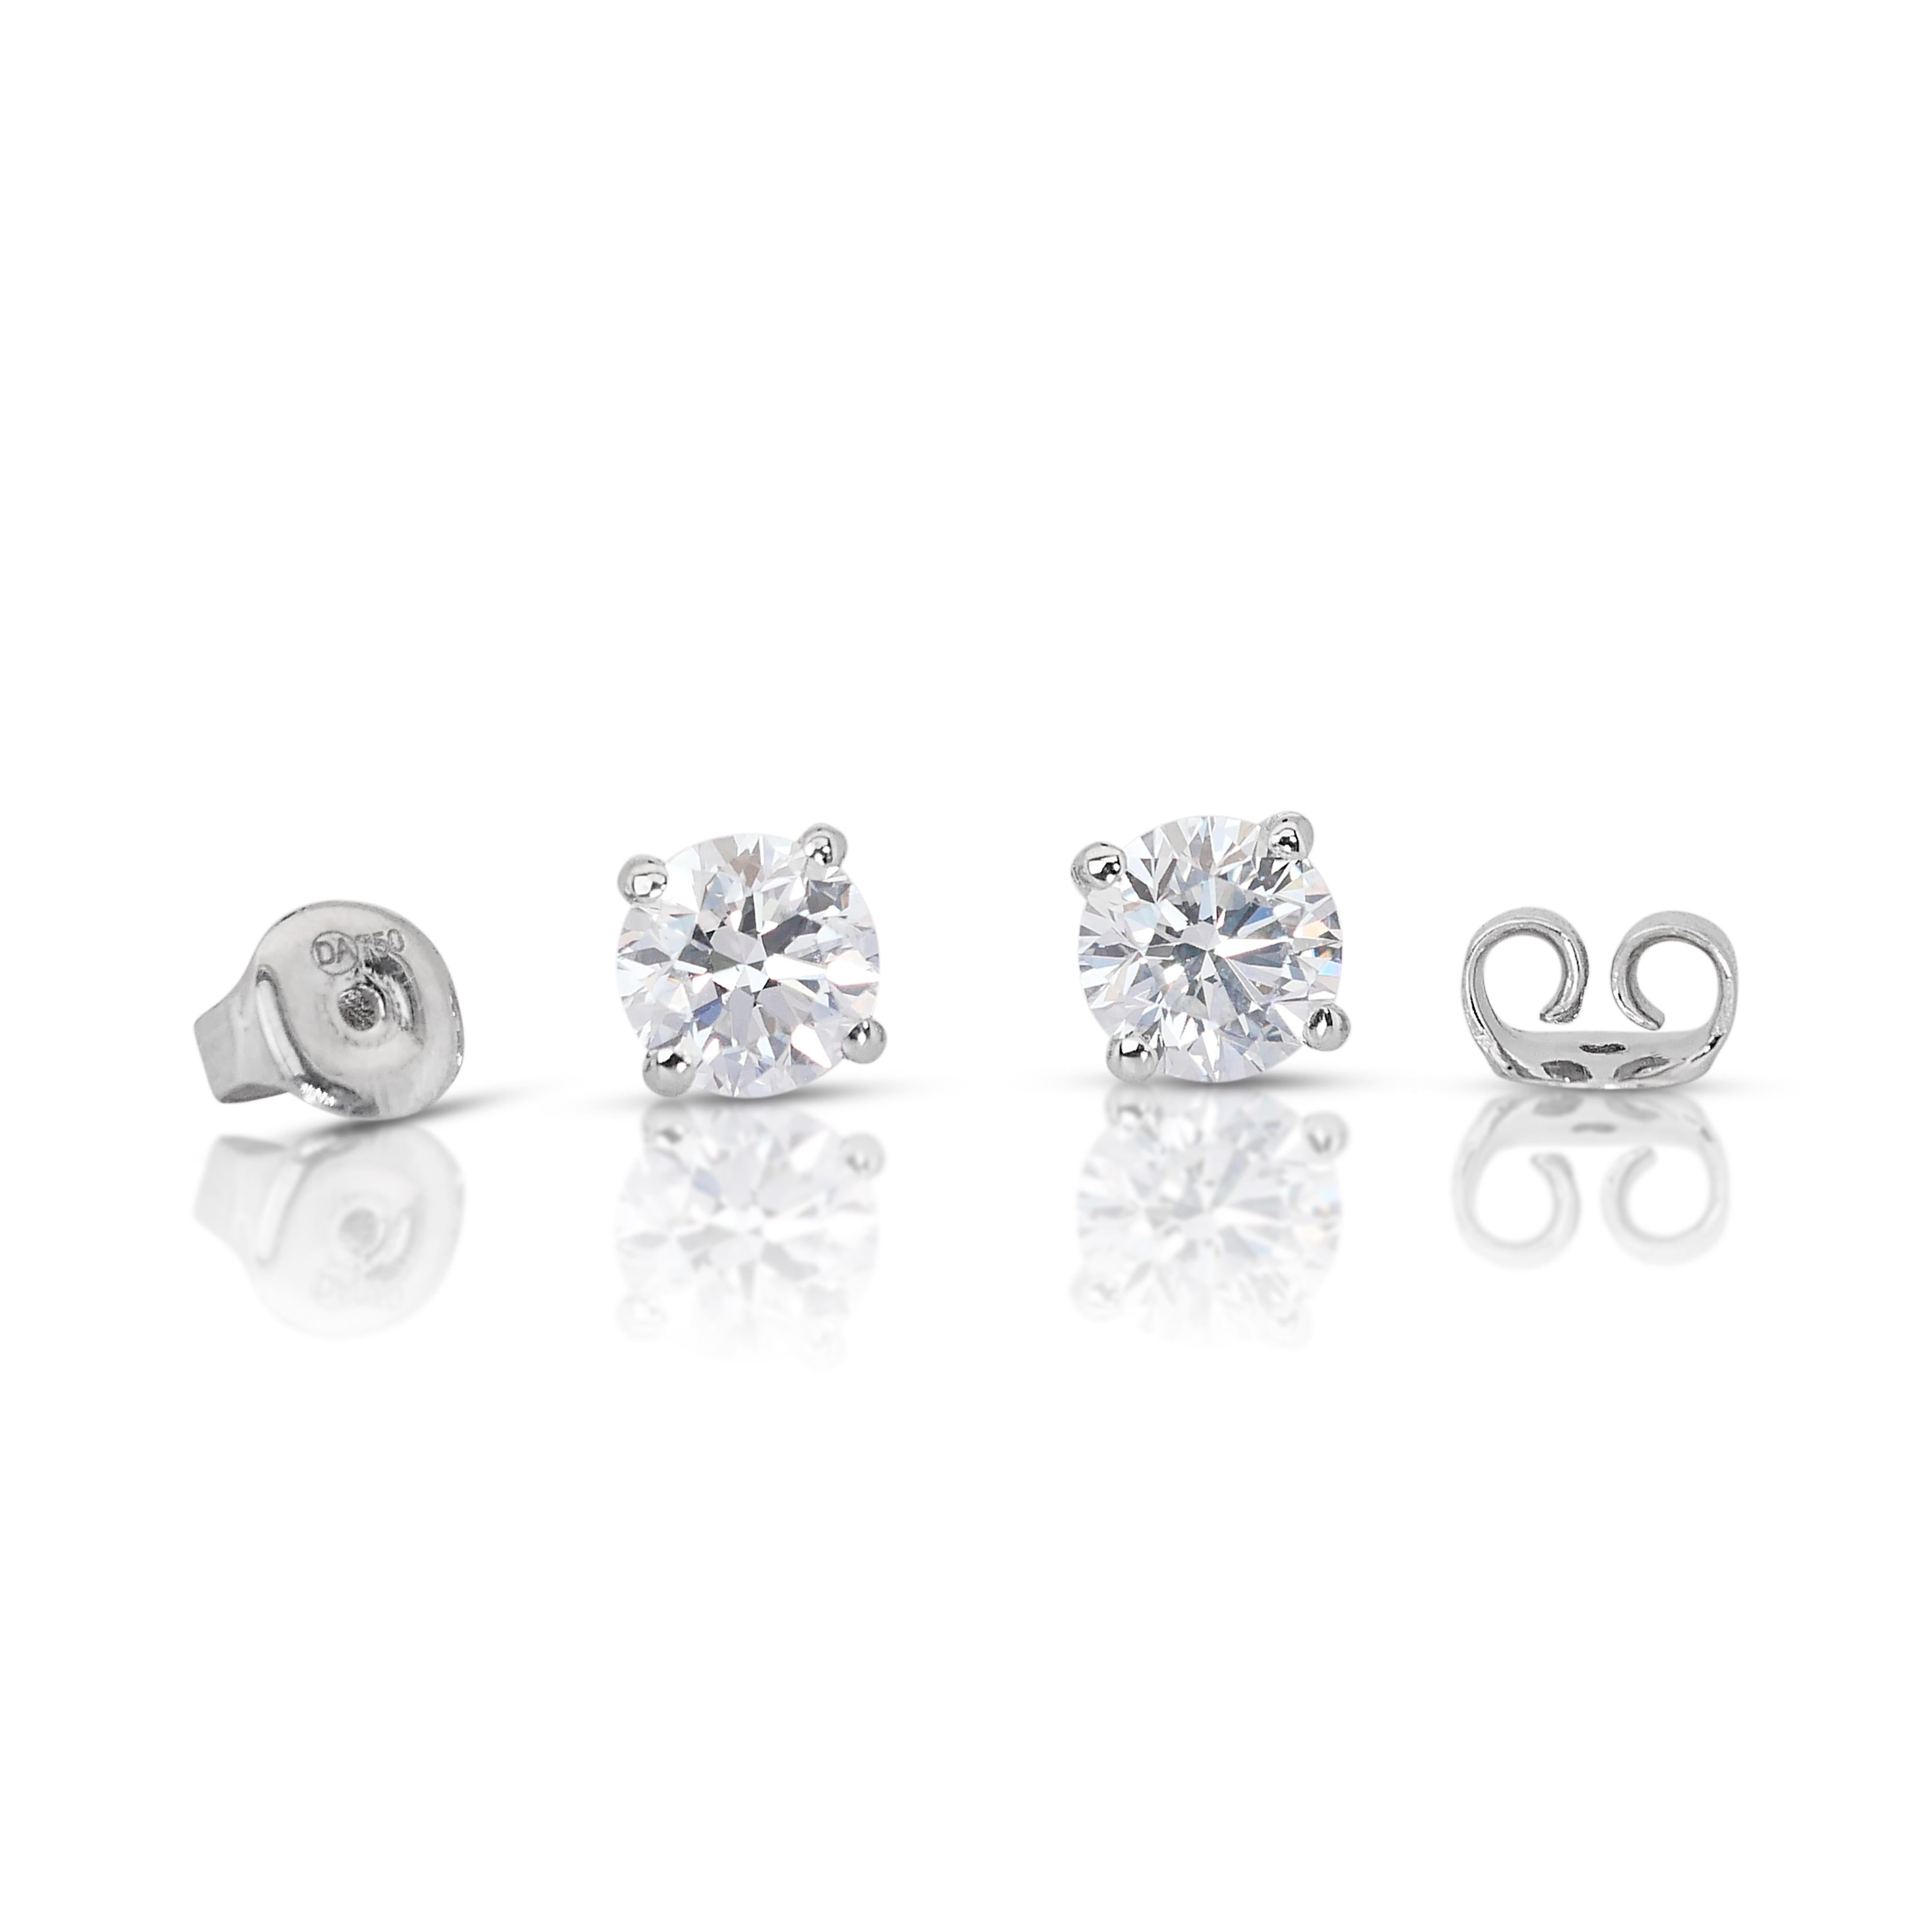 Gleaming 18K White Gold Diamond Stud Earrings with 1.8ct- GIA Certified For Sale 5